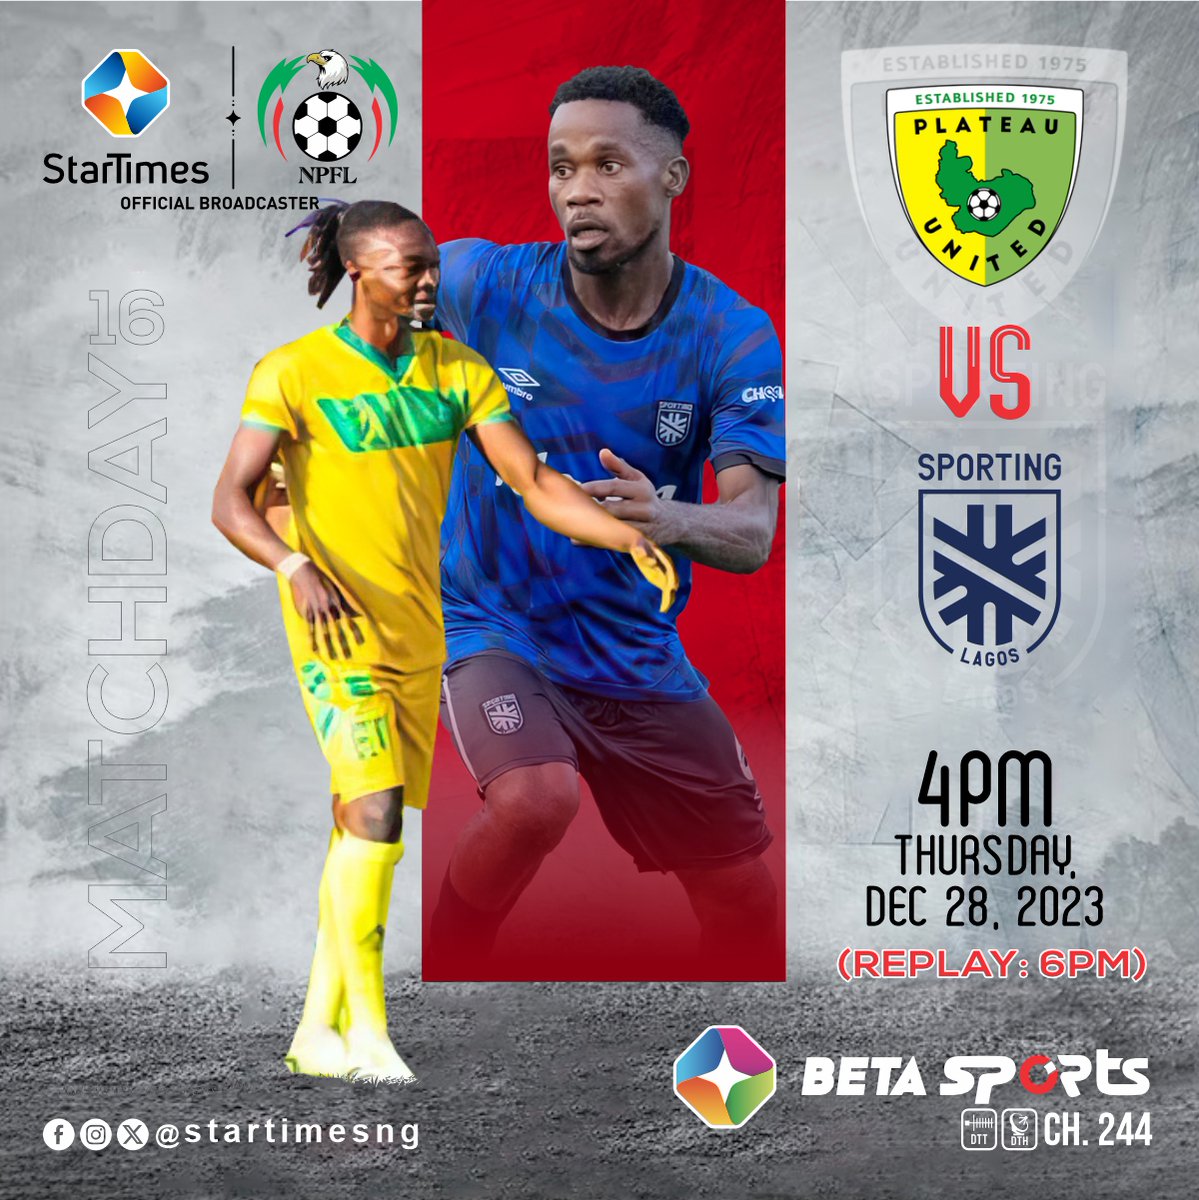 Matchday 16 of the NPFL continues as Plateau United tackles Sporting Lagos today, Thursday December 28 at 4pm on Beta Sports. 

Catch all the action exclusively on StarTimes!

#NPFL #football #StarTimesSports #Sportinglagos #Plateauunited #BetaSports